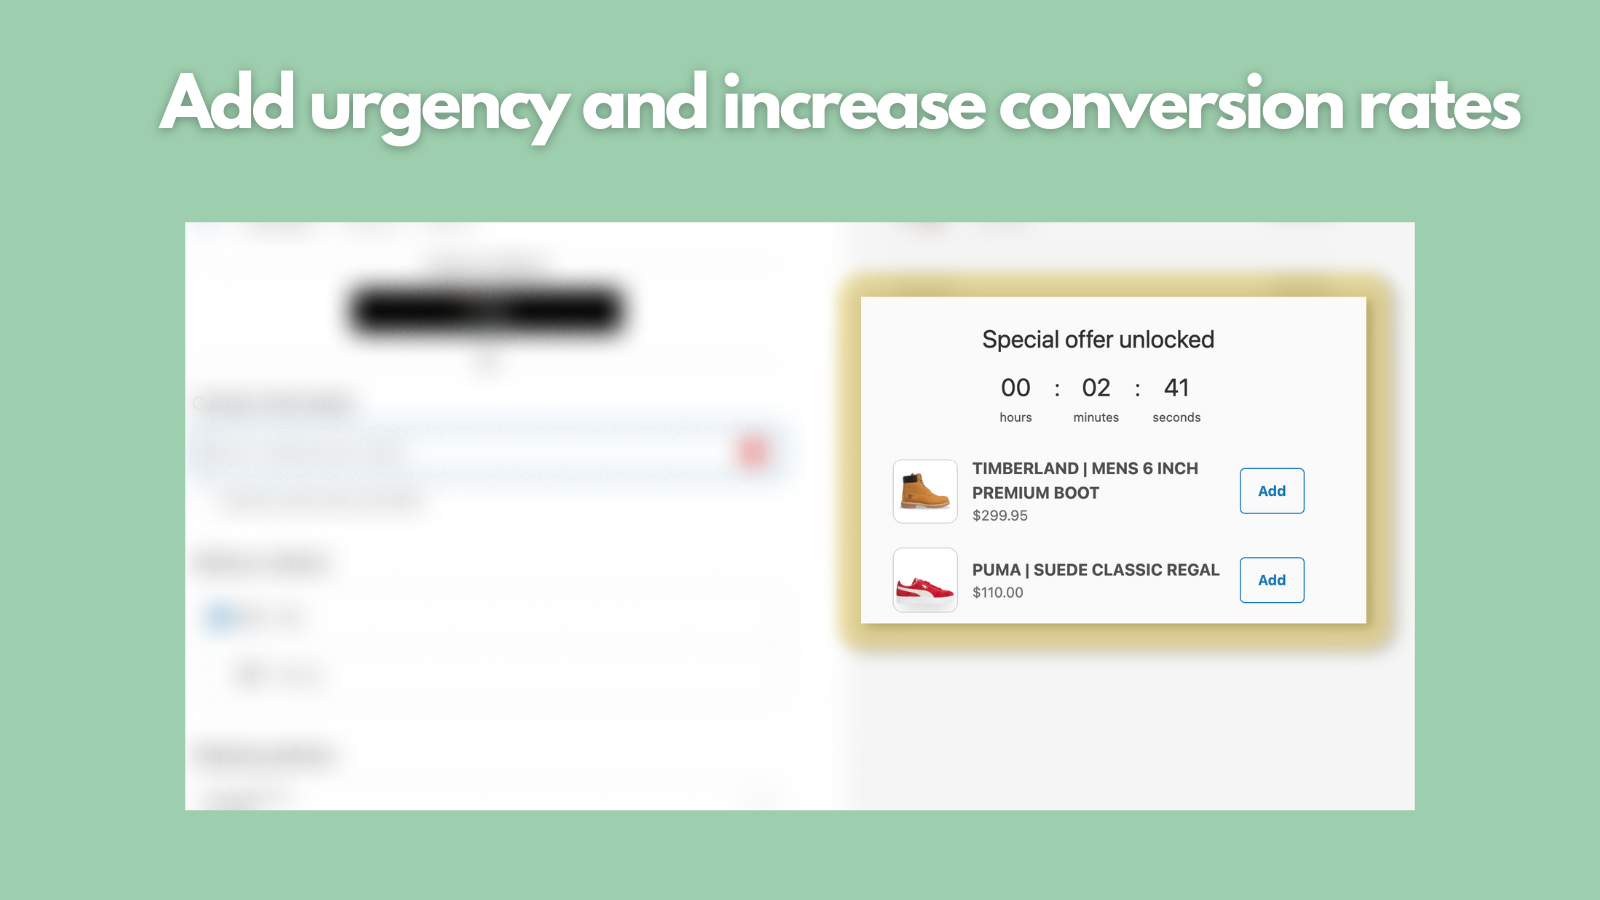 Increase conversion rates by adding urgency